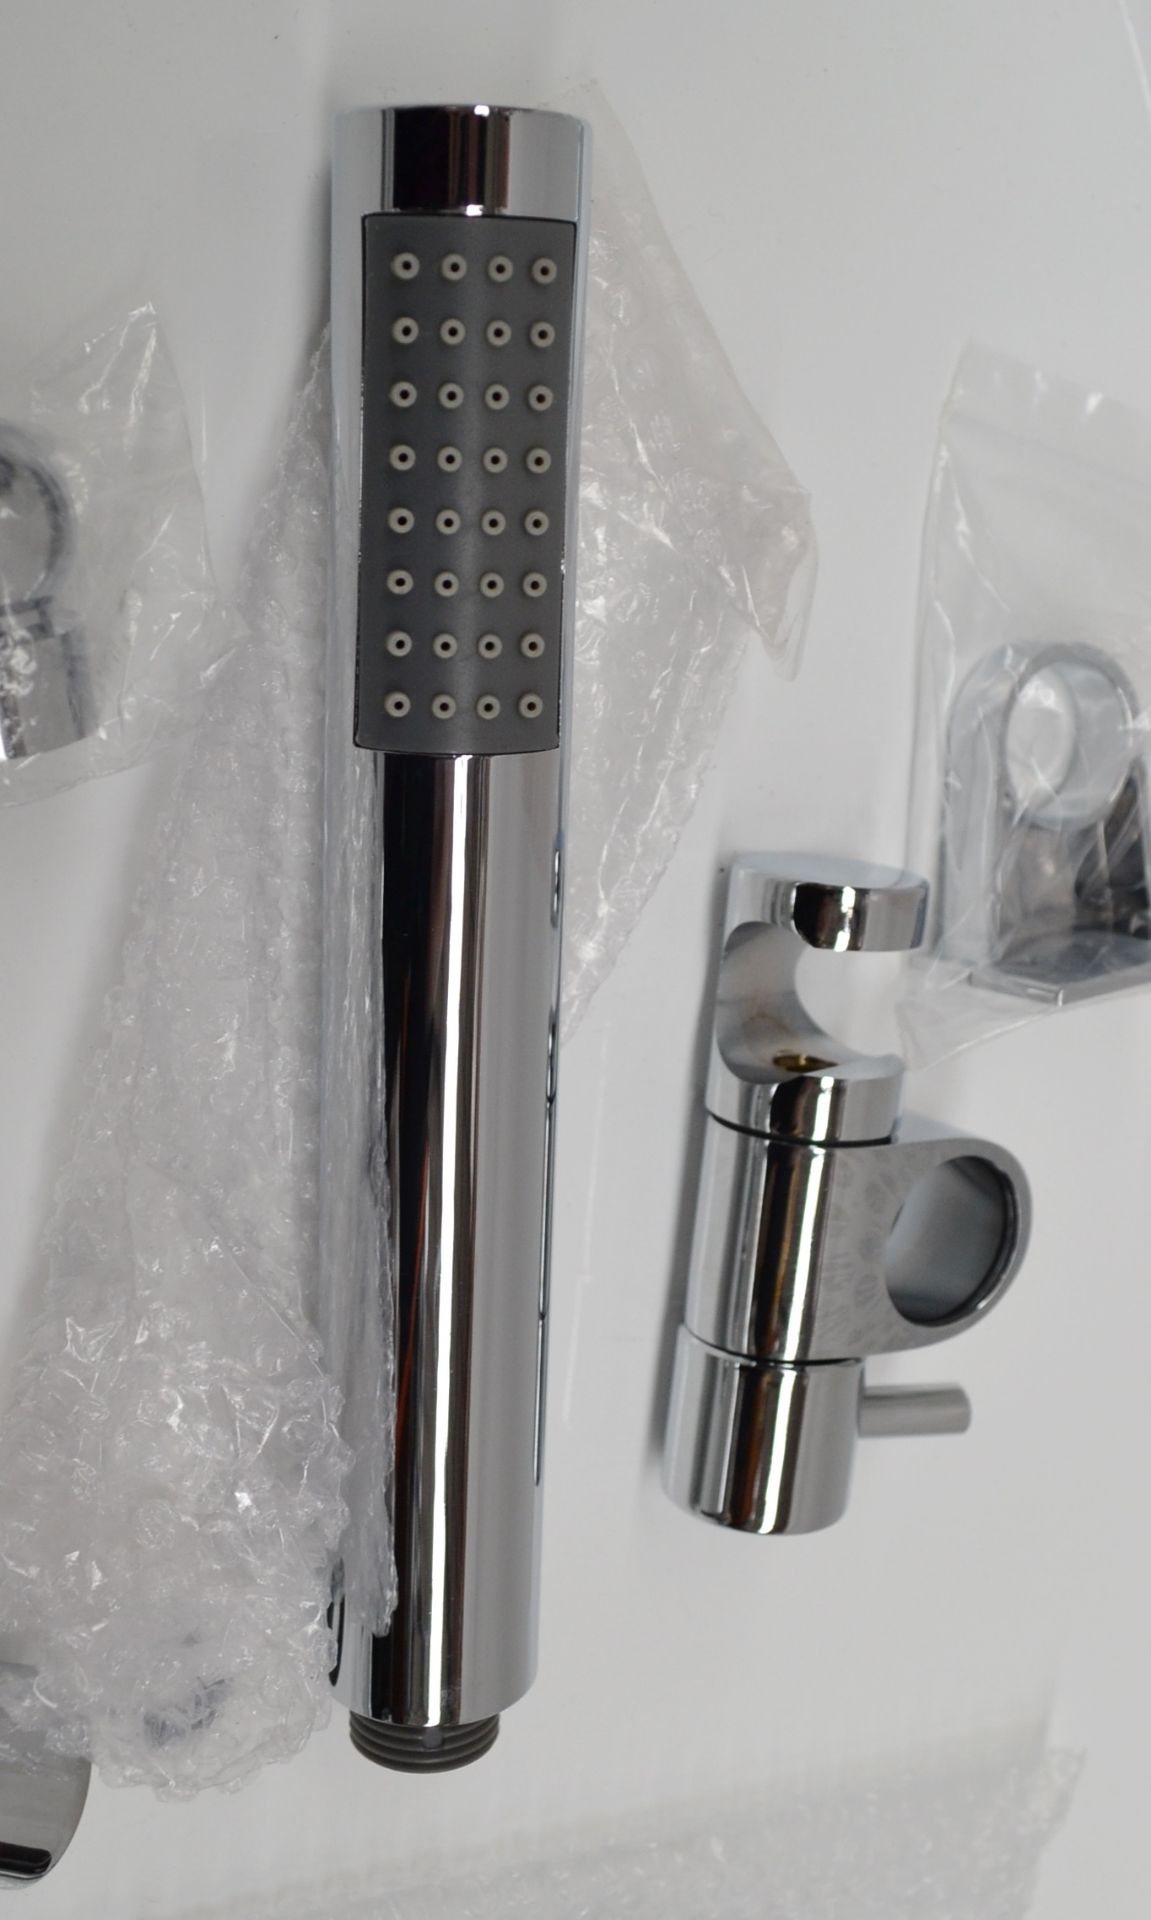 1 x ZEPHYR Shower Kit with Round Head and Minimalist Handset - Chrome - Ref: MBI004 - CL190 - H116 x - Image 5 of 7